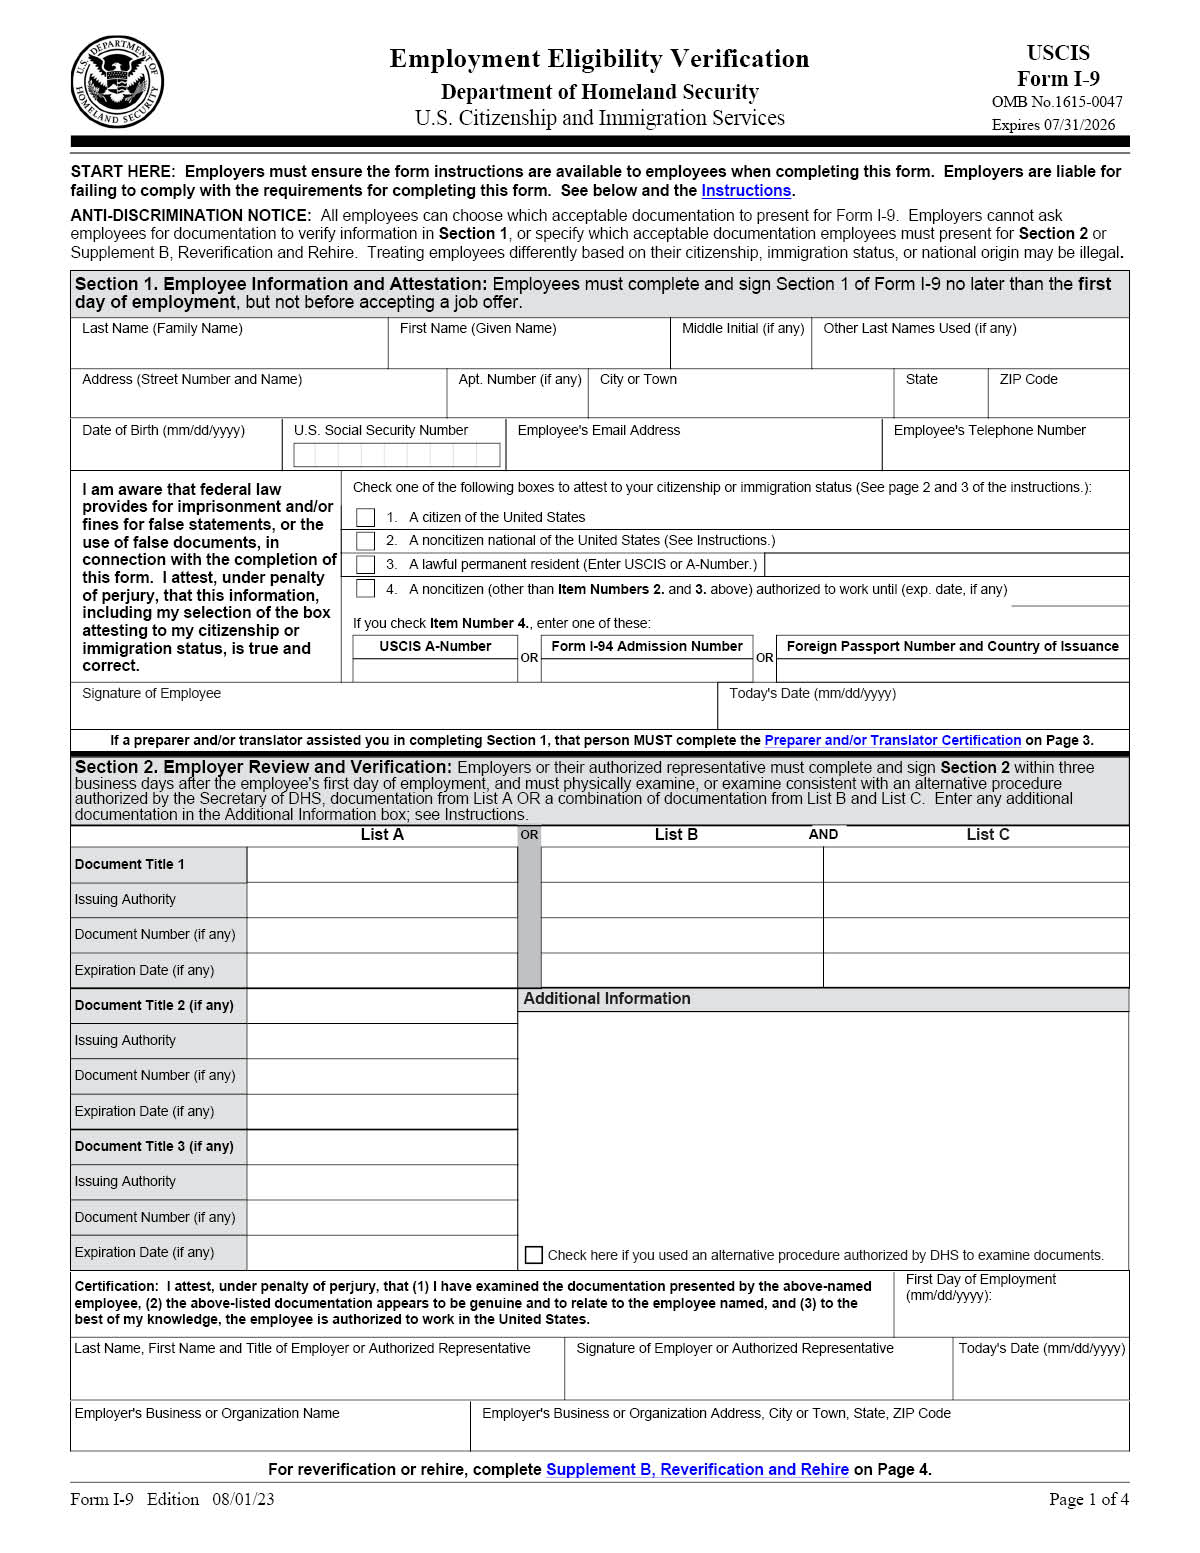 I-9 Employment Eligibility Form - Page 1